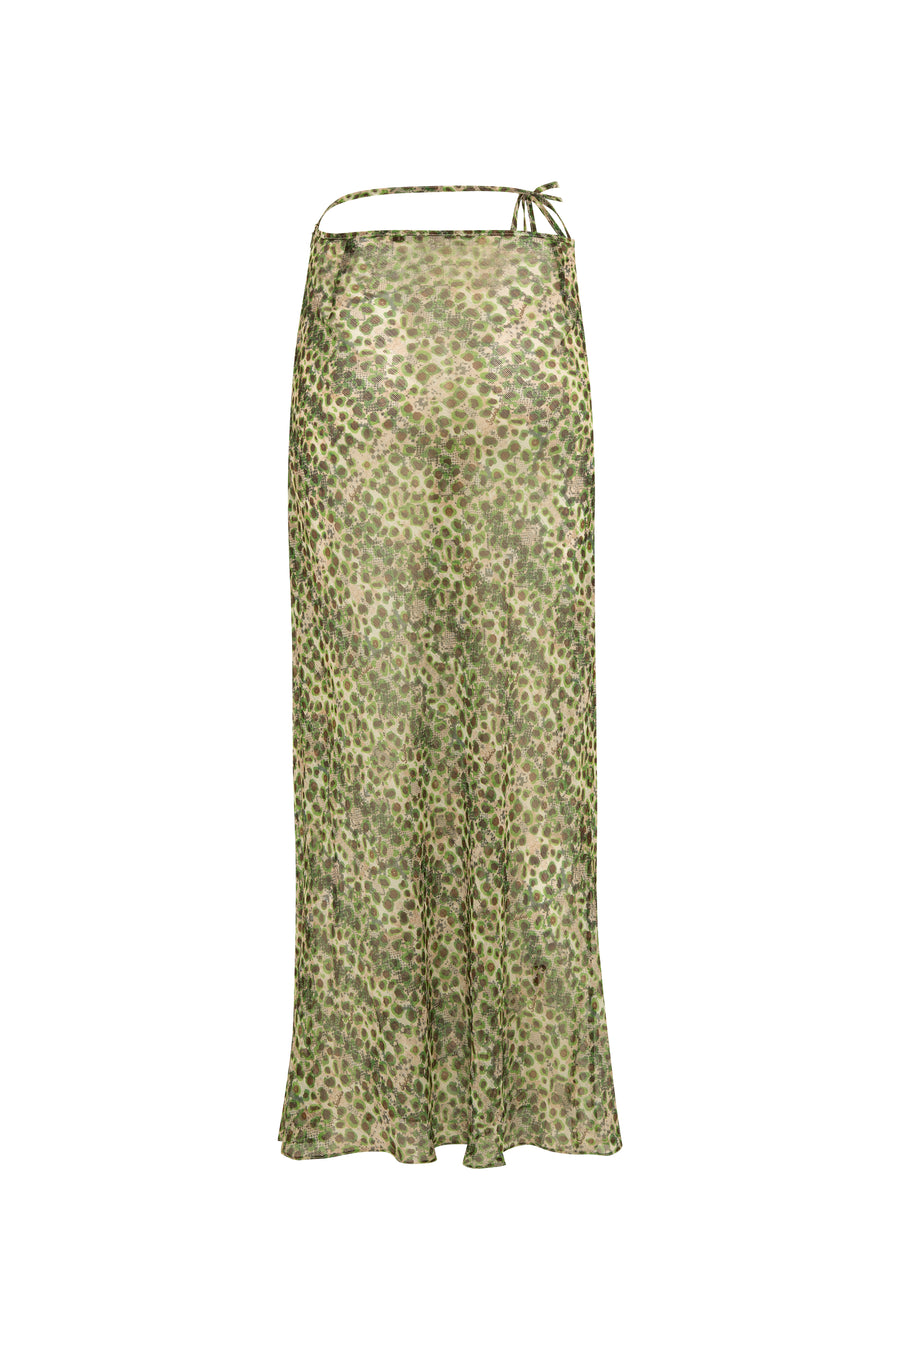 SINY - Printed sheer maxi skirt with bead details